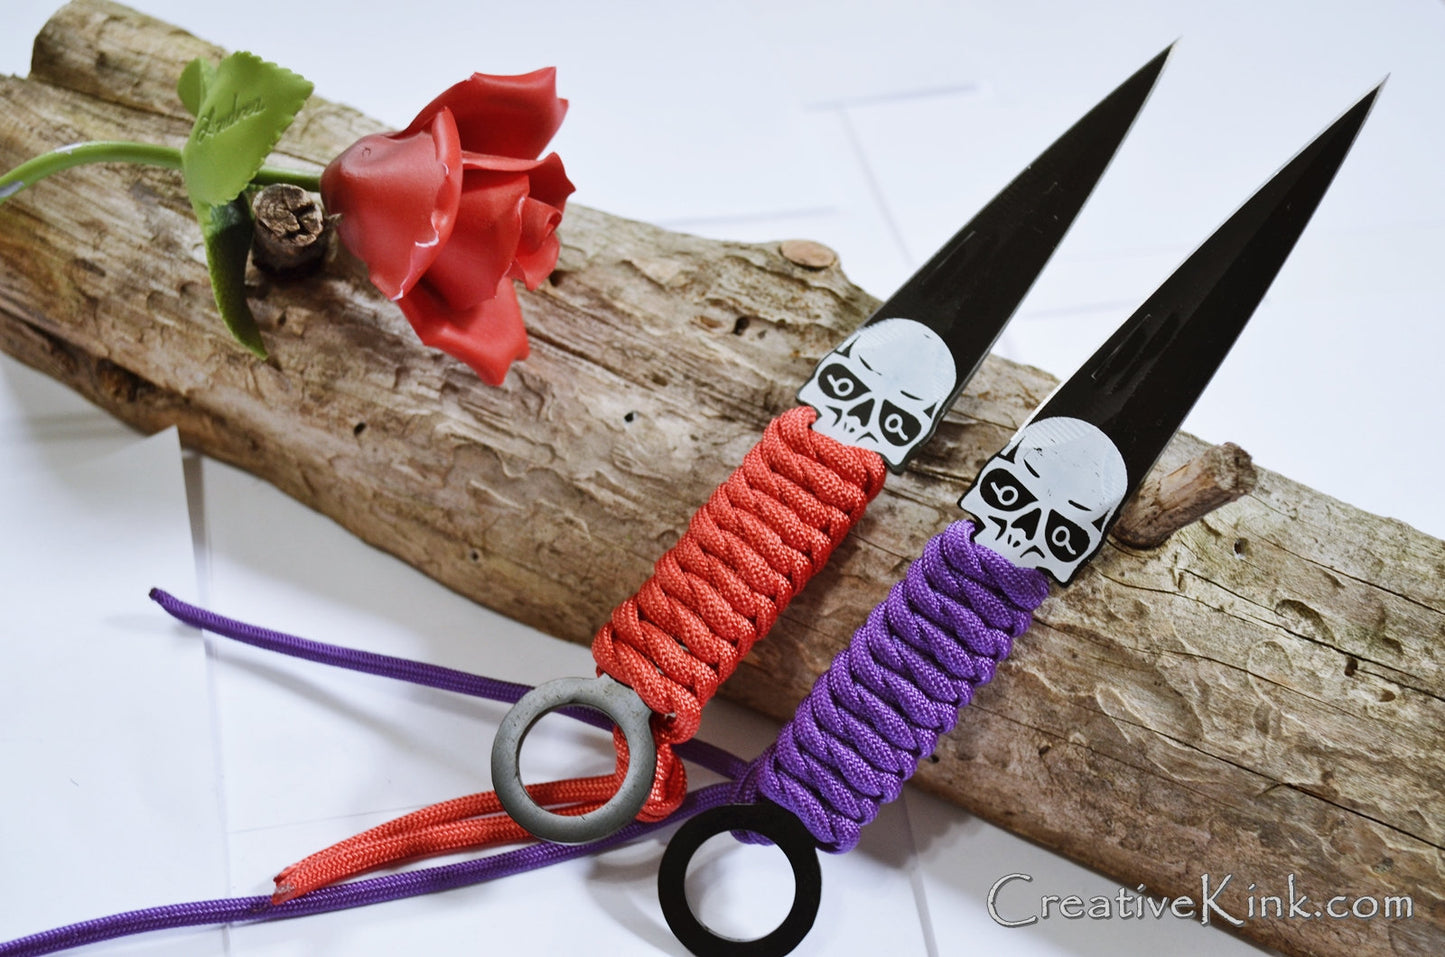 Violent Purple and Brilliant Red 8" Skull Daggers - BDSM Fear Play Knives